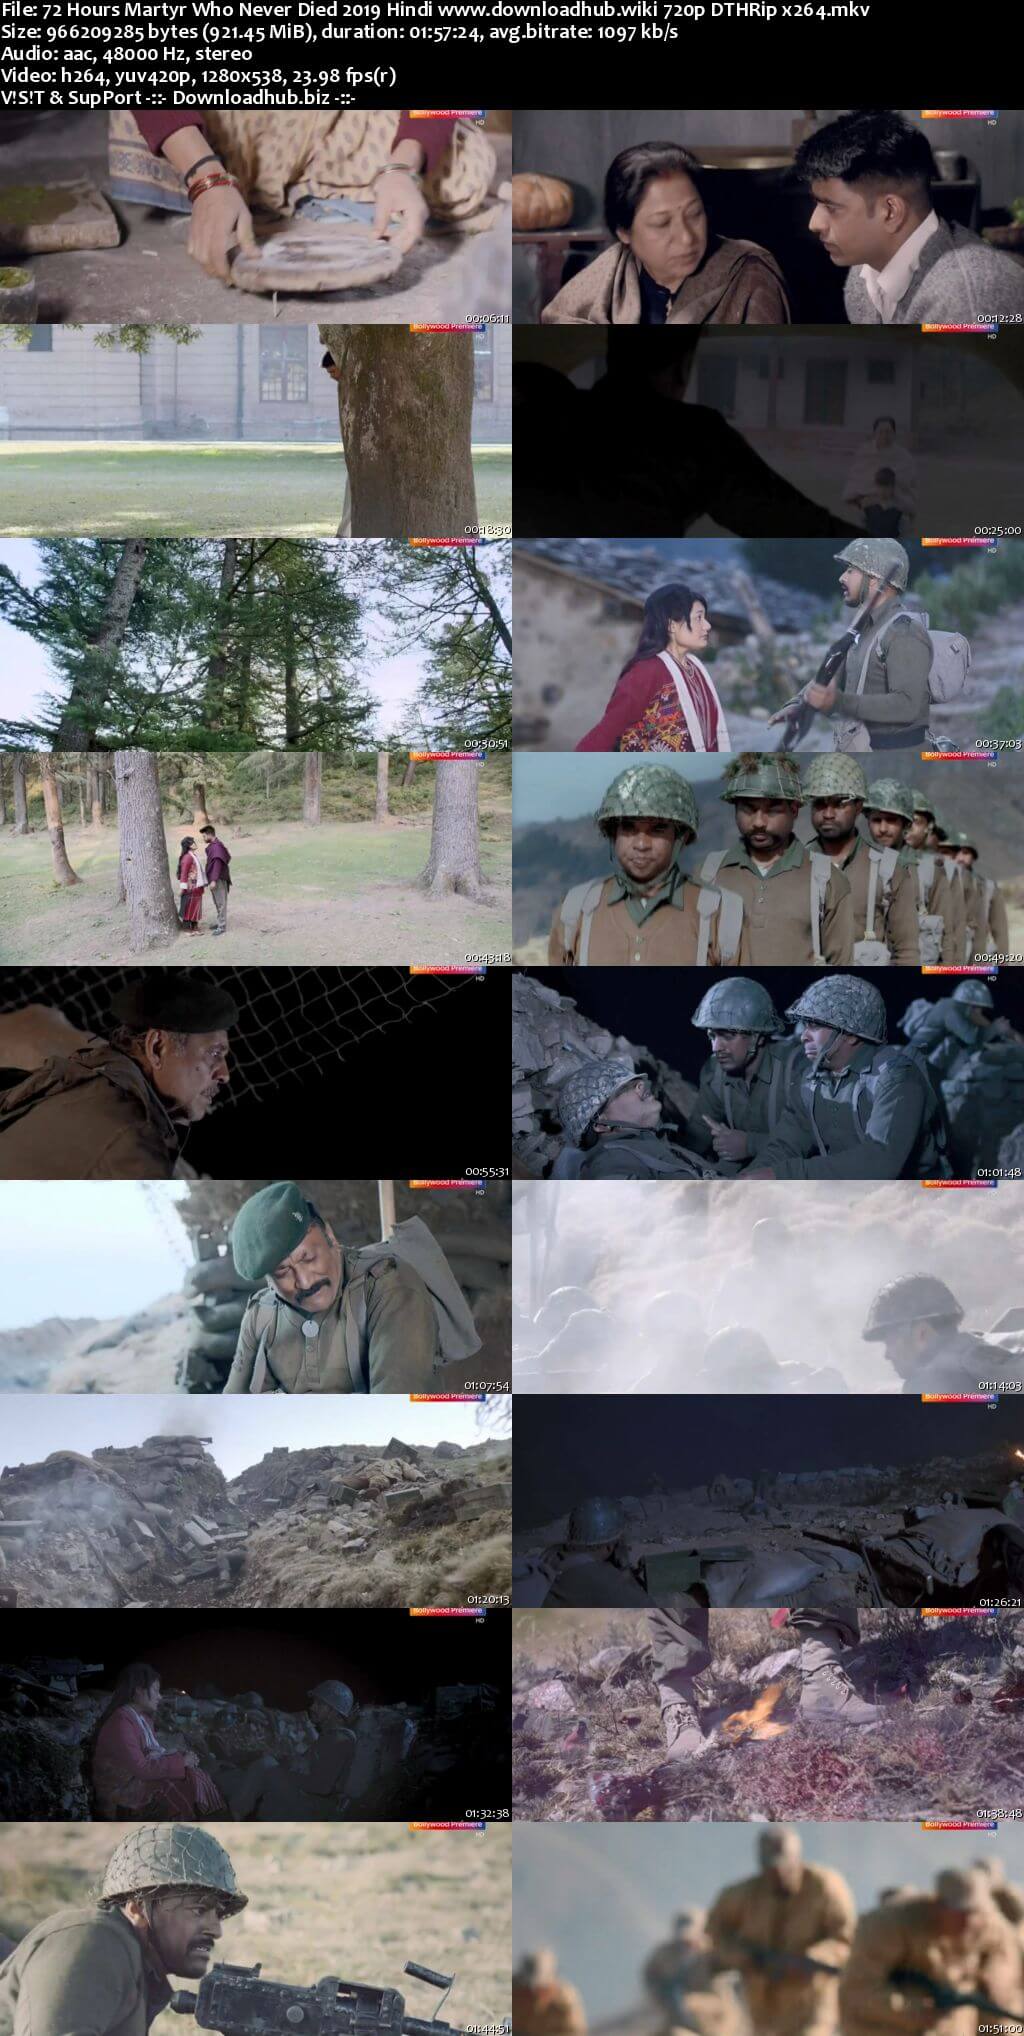 72 Hours Martyr Who Never Died 2019 Hindi 720p DTHRip x264